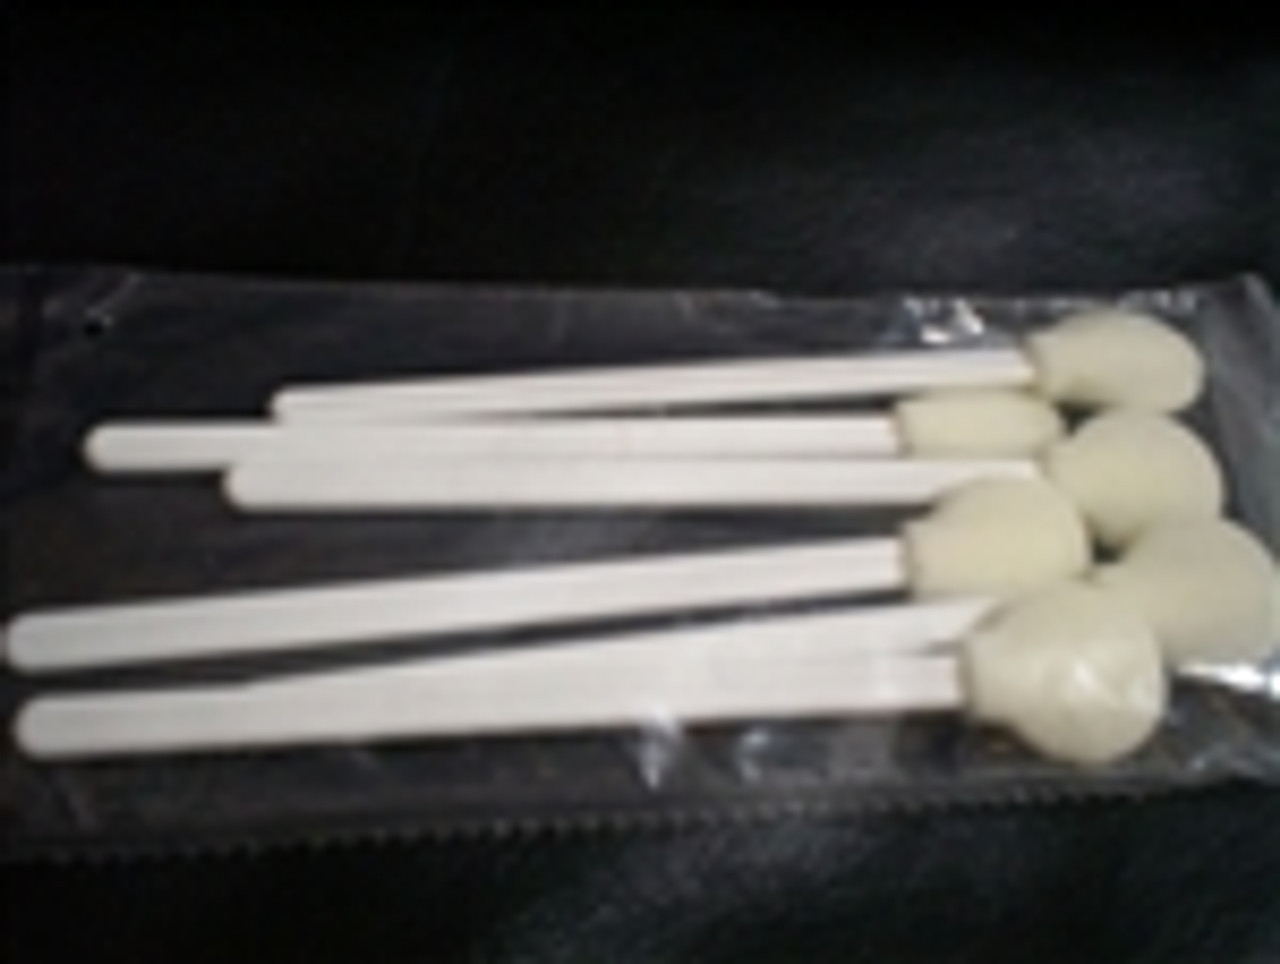 Small Swabs or smoothies, Package of 6